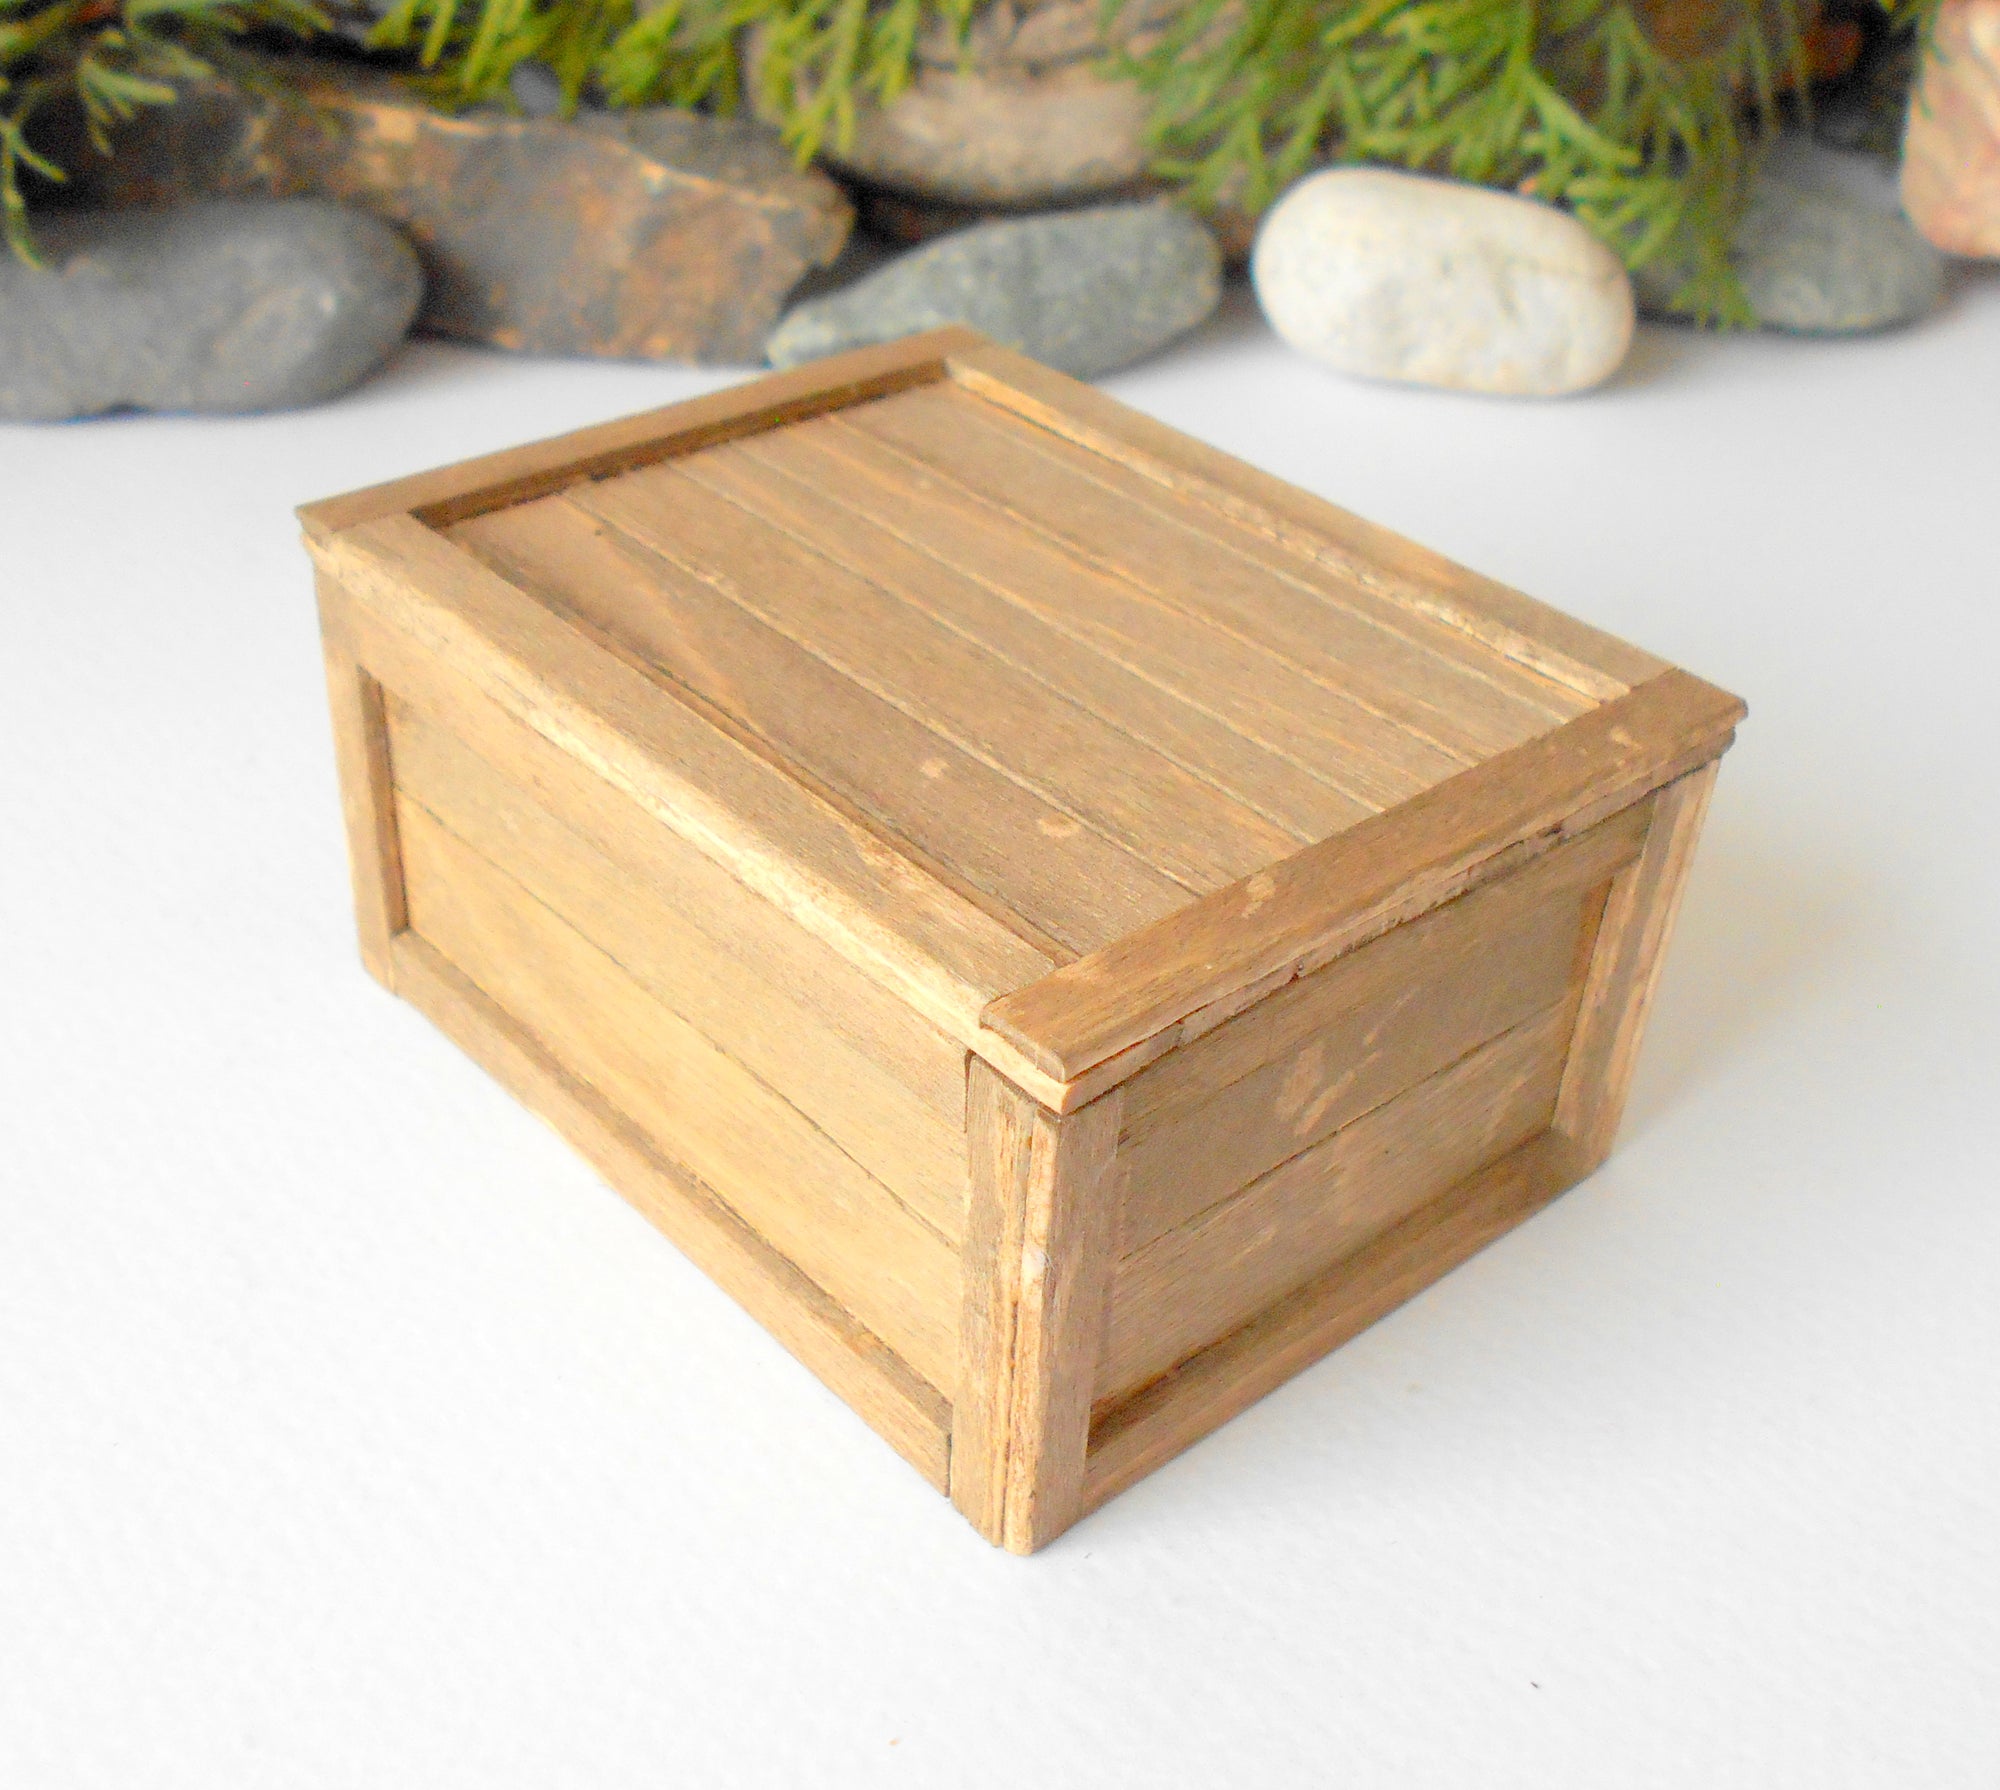 This is a miniature transporting box coffer that is approximately 1/12 in scale. The box coffer has 3 wooden boards in height and four boards in width on each side.<br data-mce-fragment="1">This is a listing to purchase one such miniature box like the one you see from the pictures. I have stained the box in light brown with an Italian eco-friendly mordant.&nbsp;